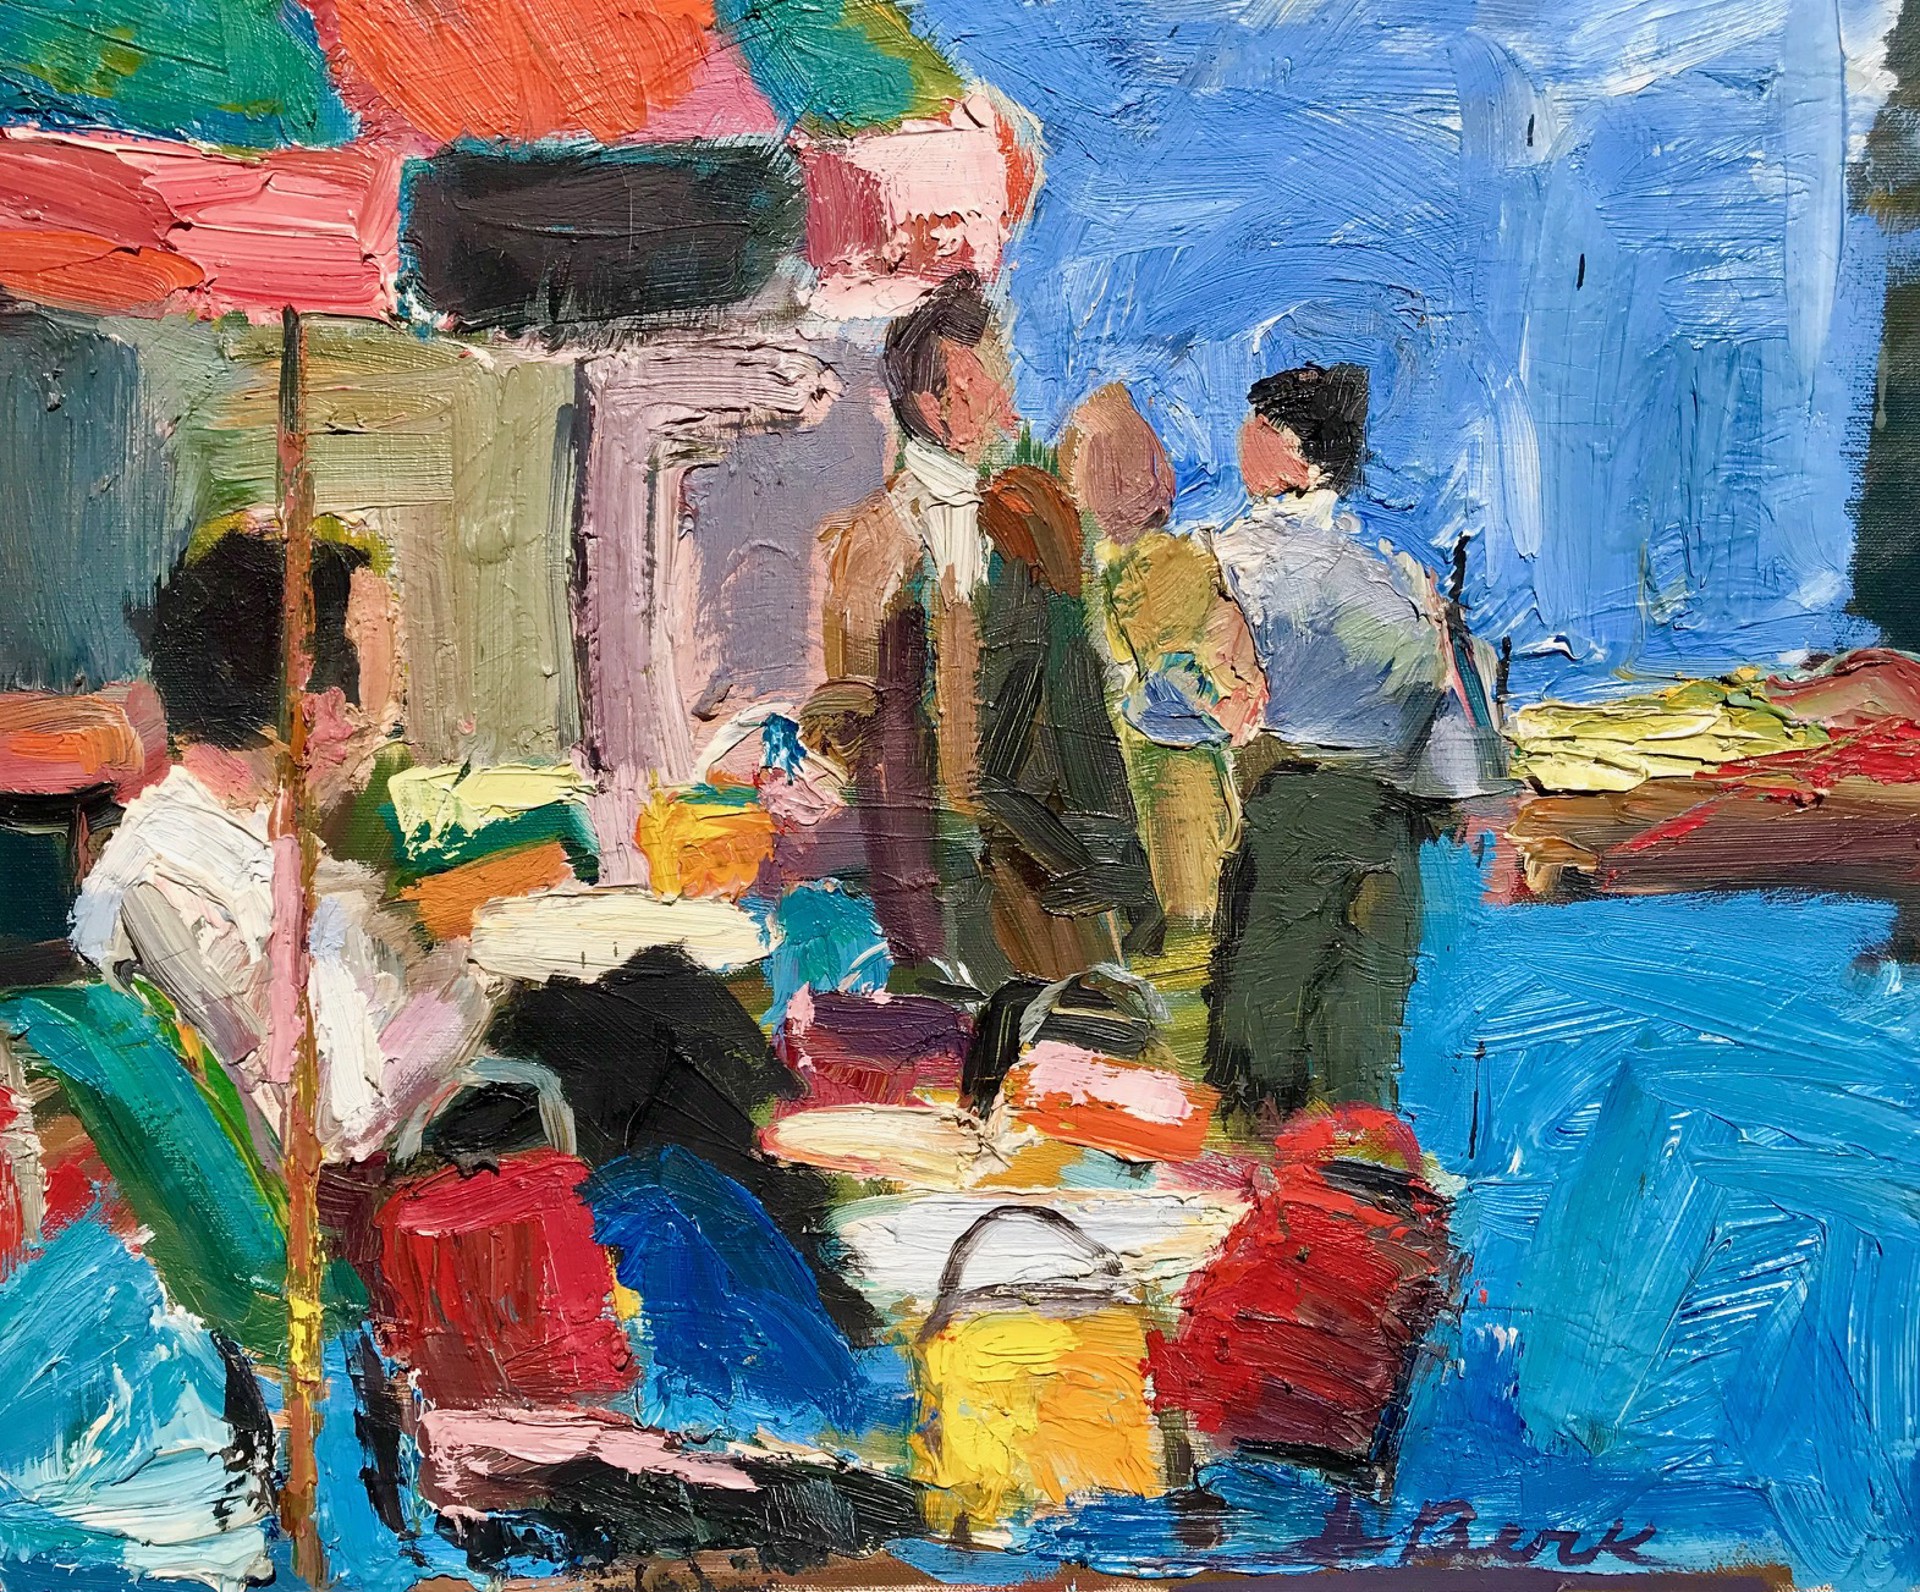 A street scene with 3 men, two standing and one sitting at a table with an orange and green umbrella